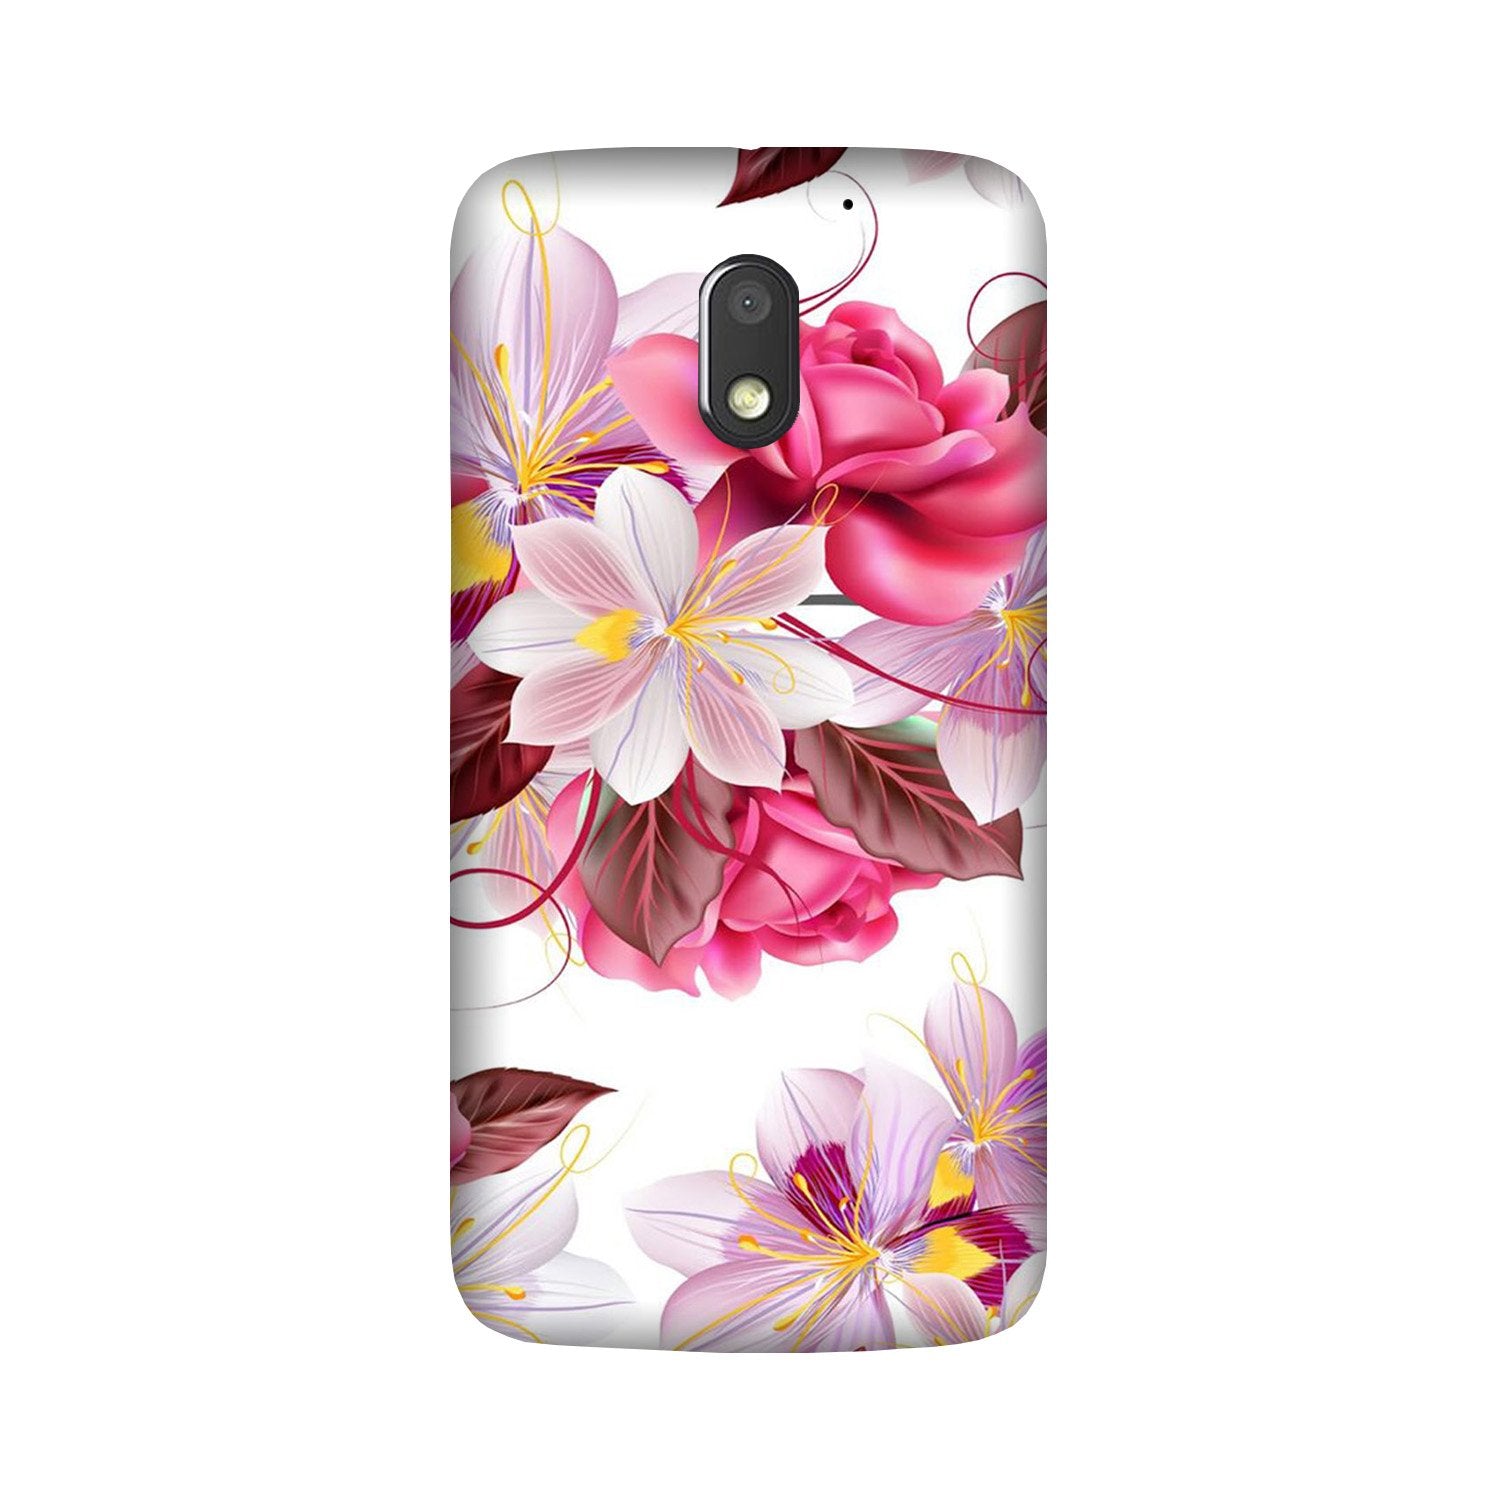 Beautiful flowers Case for Moto G4 Play